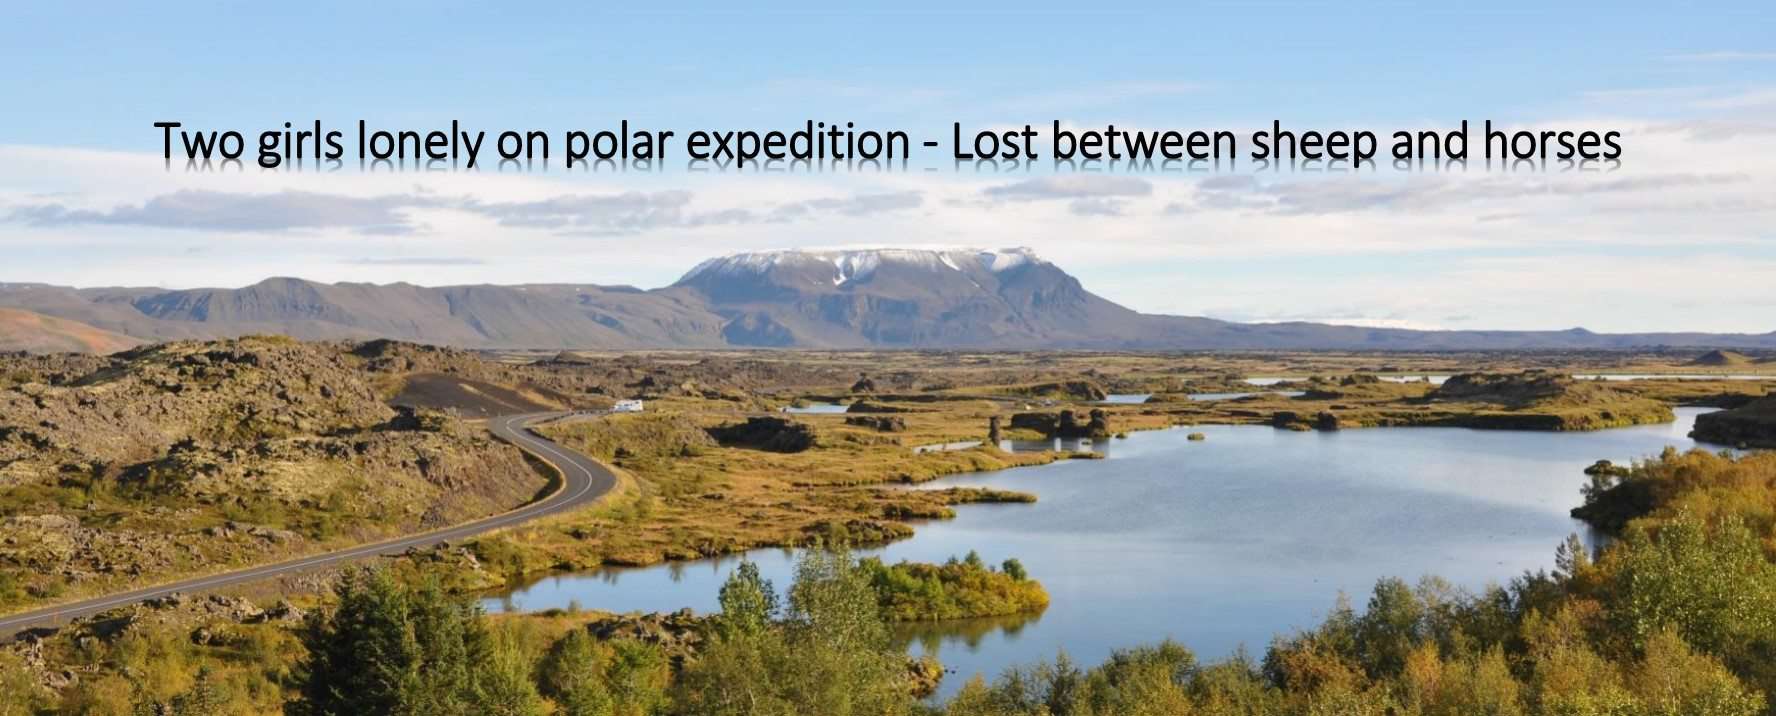 2 girls lost in Iceland